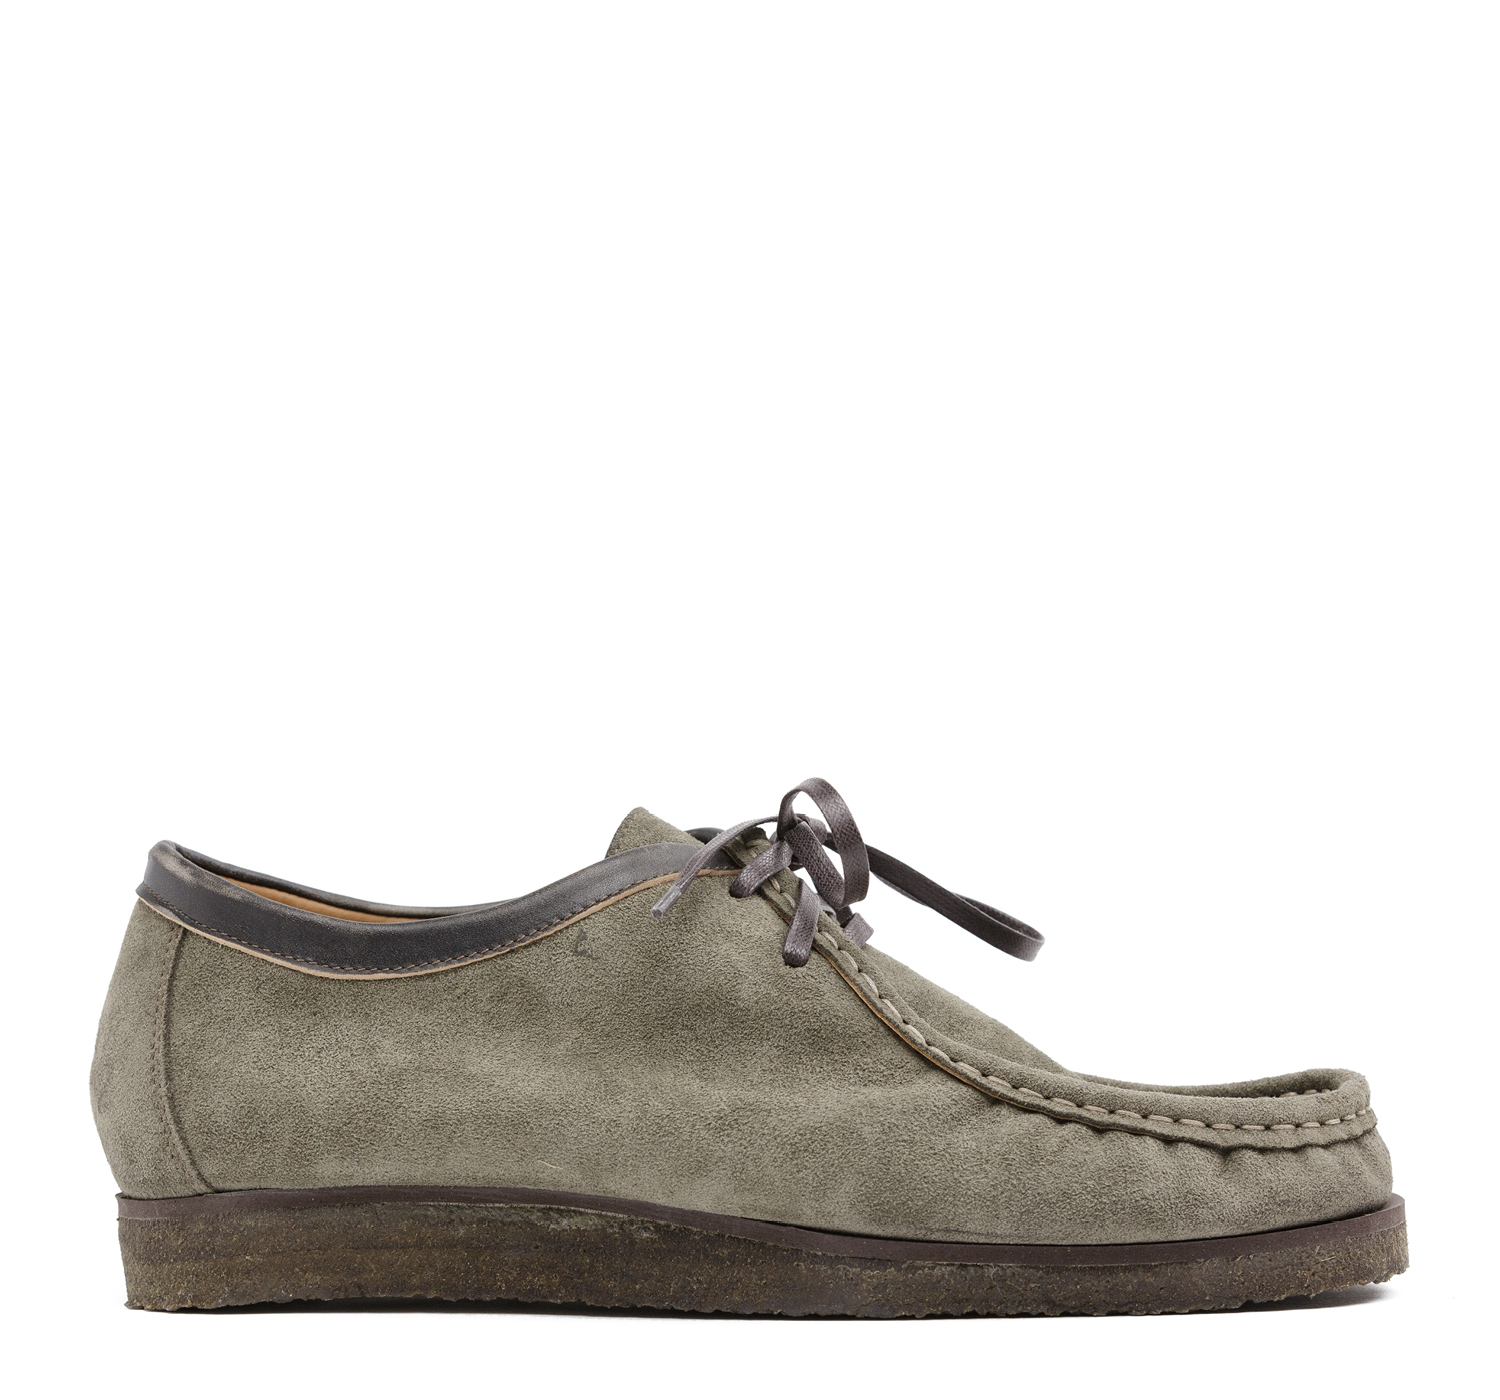 Wallabee in gray suede leather - Rust Mood